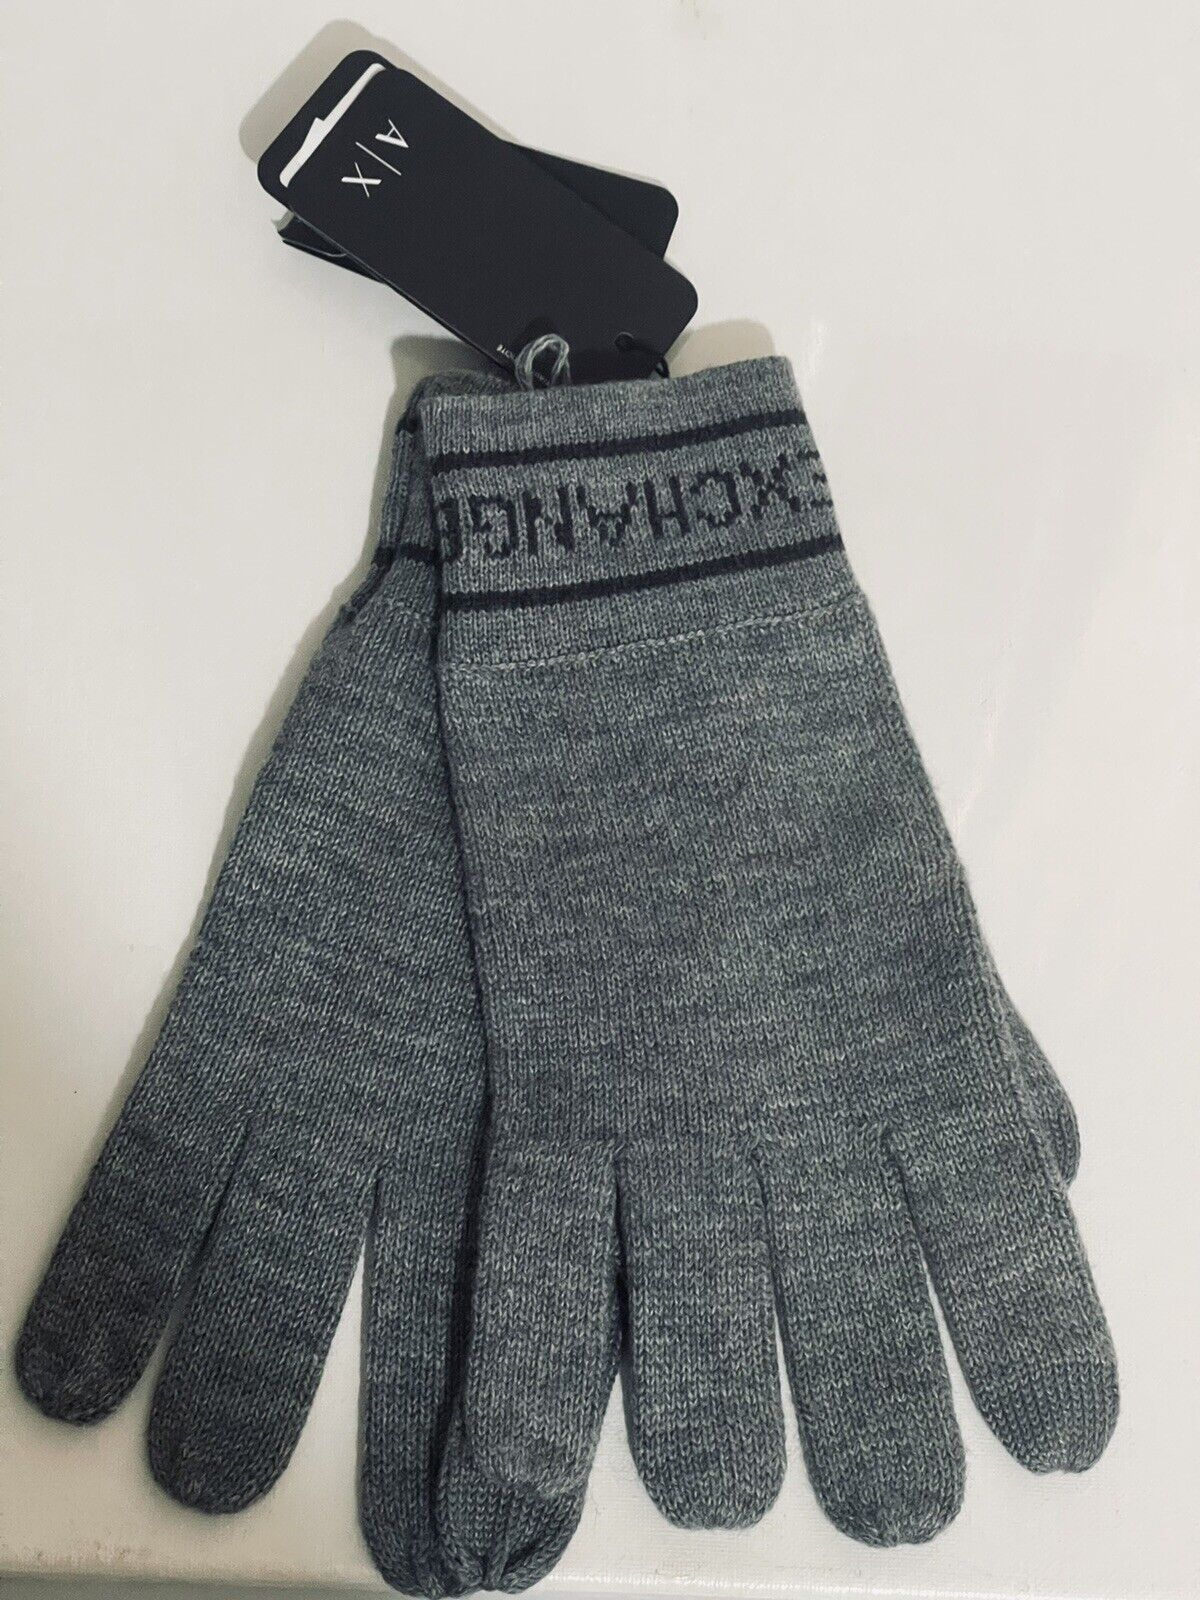 New New Free Shipping Armani Exchange AX Limited time for free shipping GLOVES Mens LOGO-KNIT